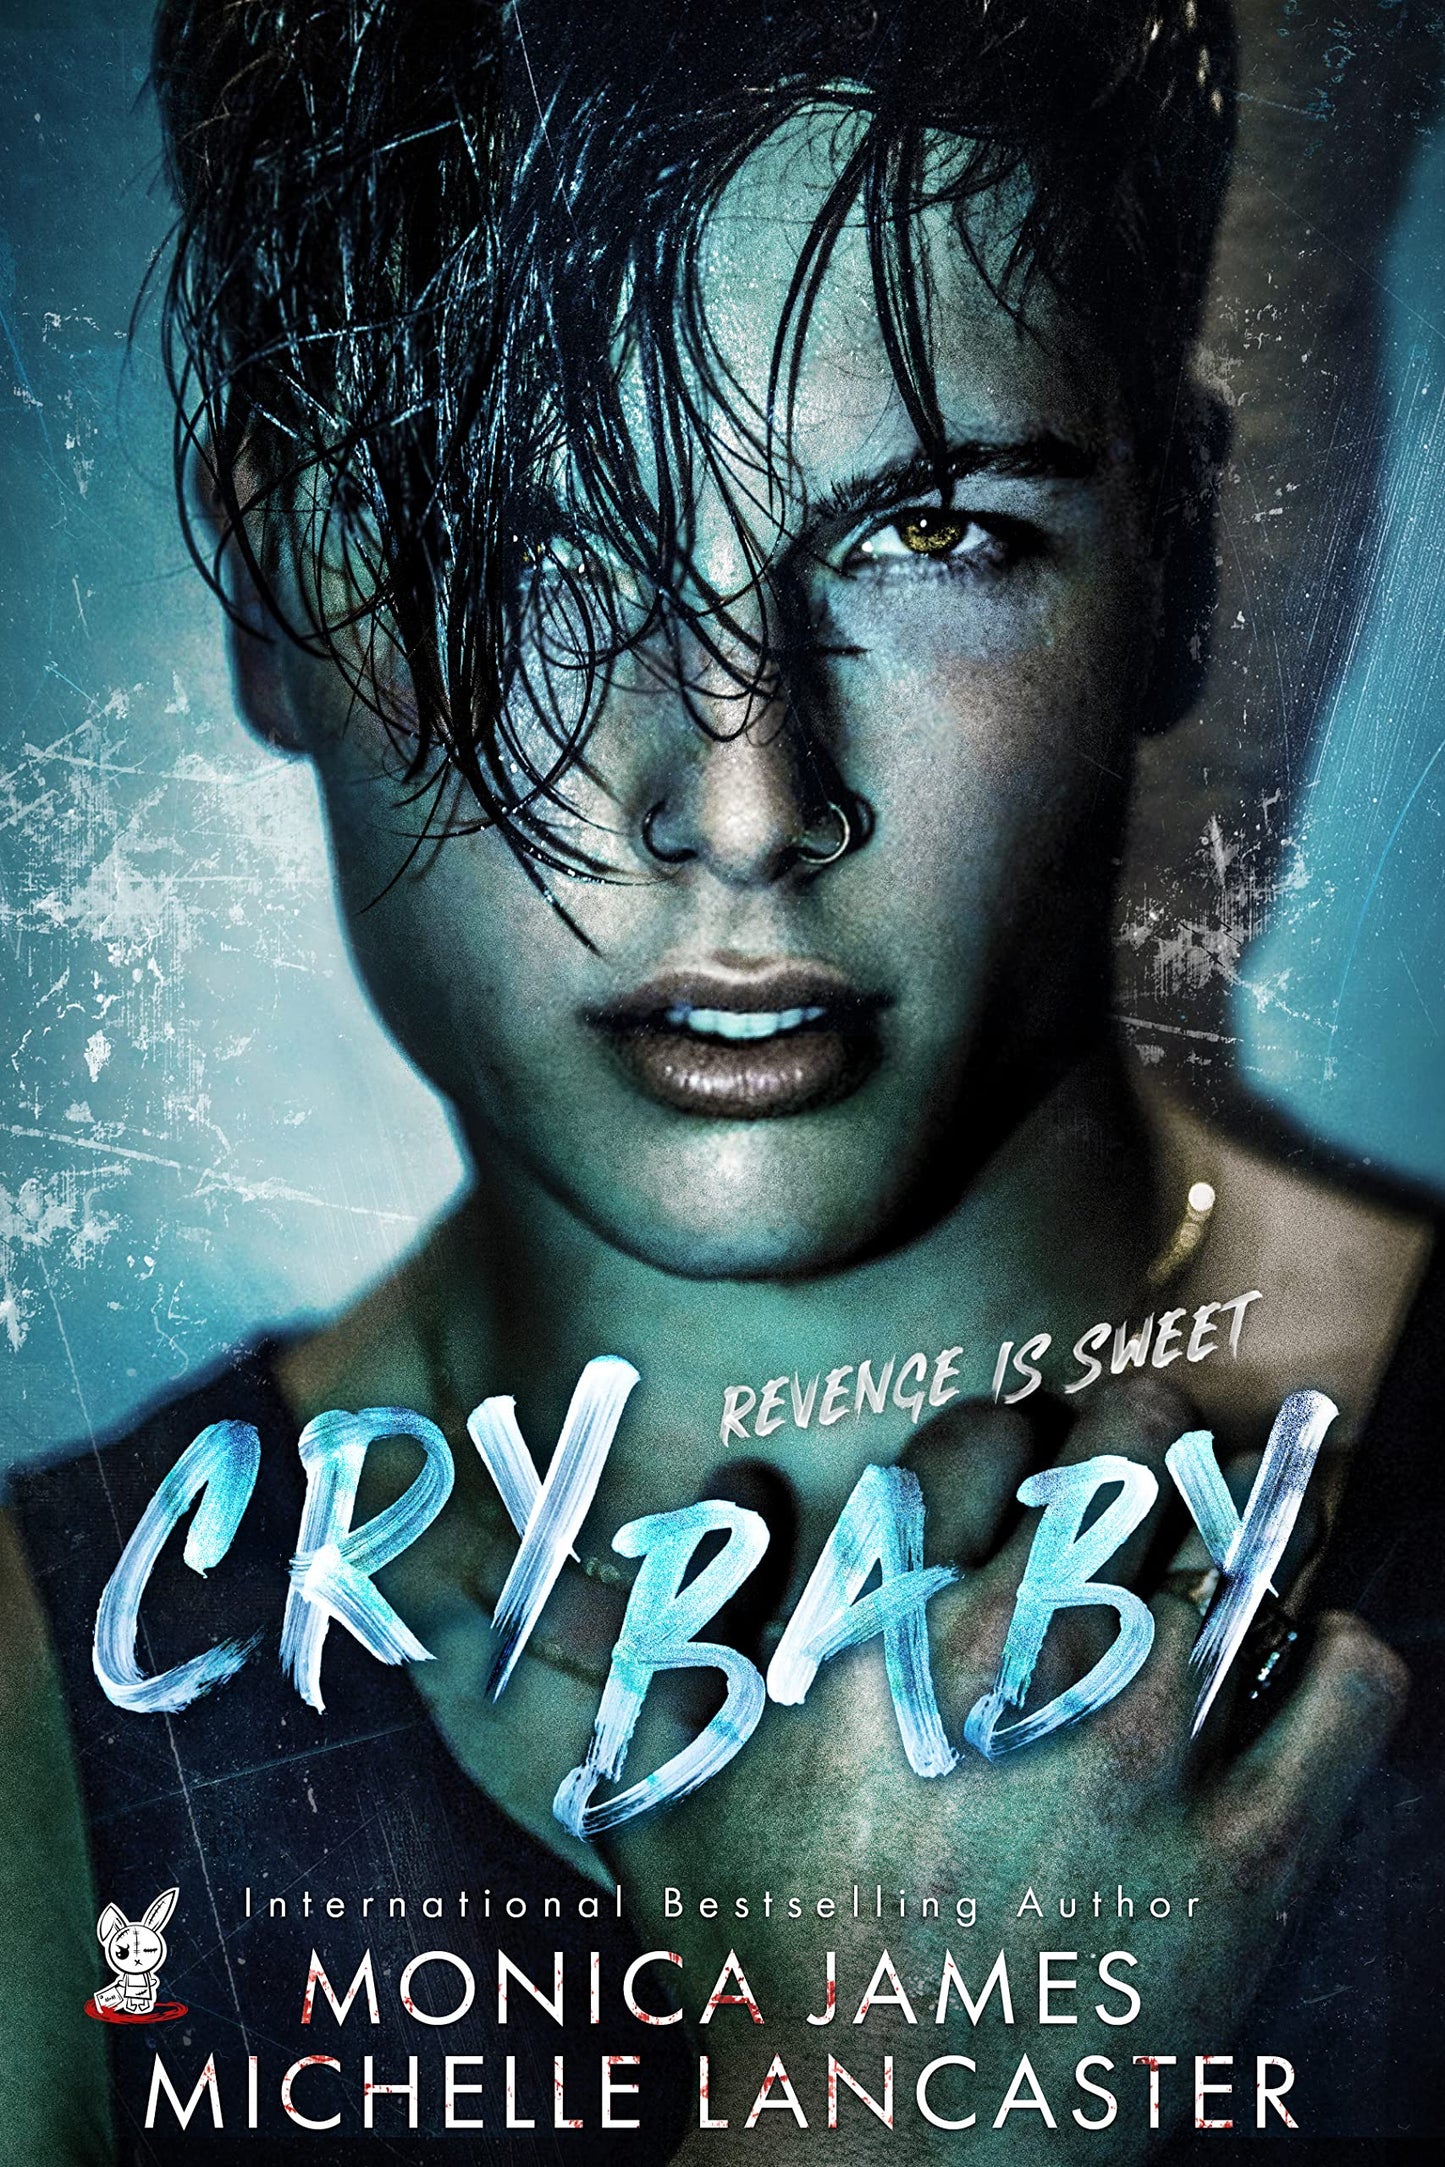 Crybaby - Monica James & Michelle Lancaster